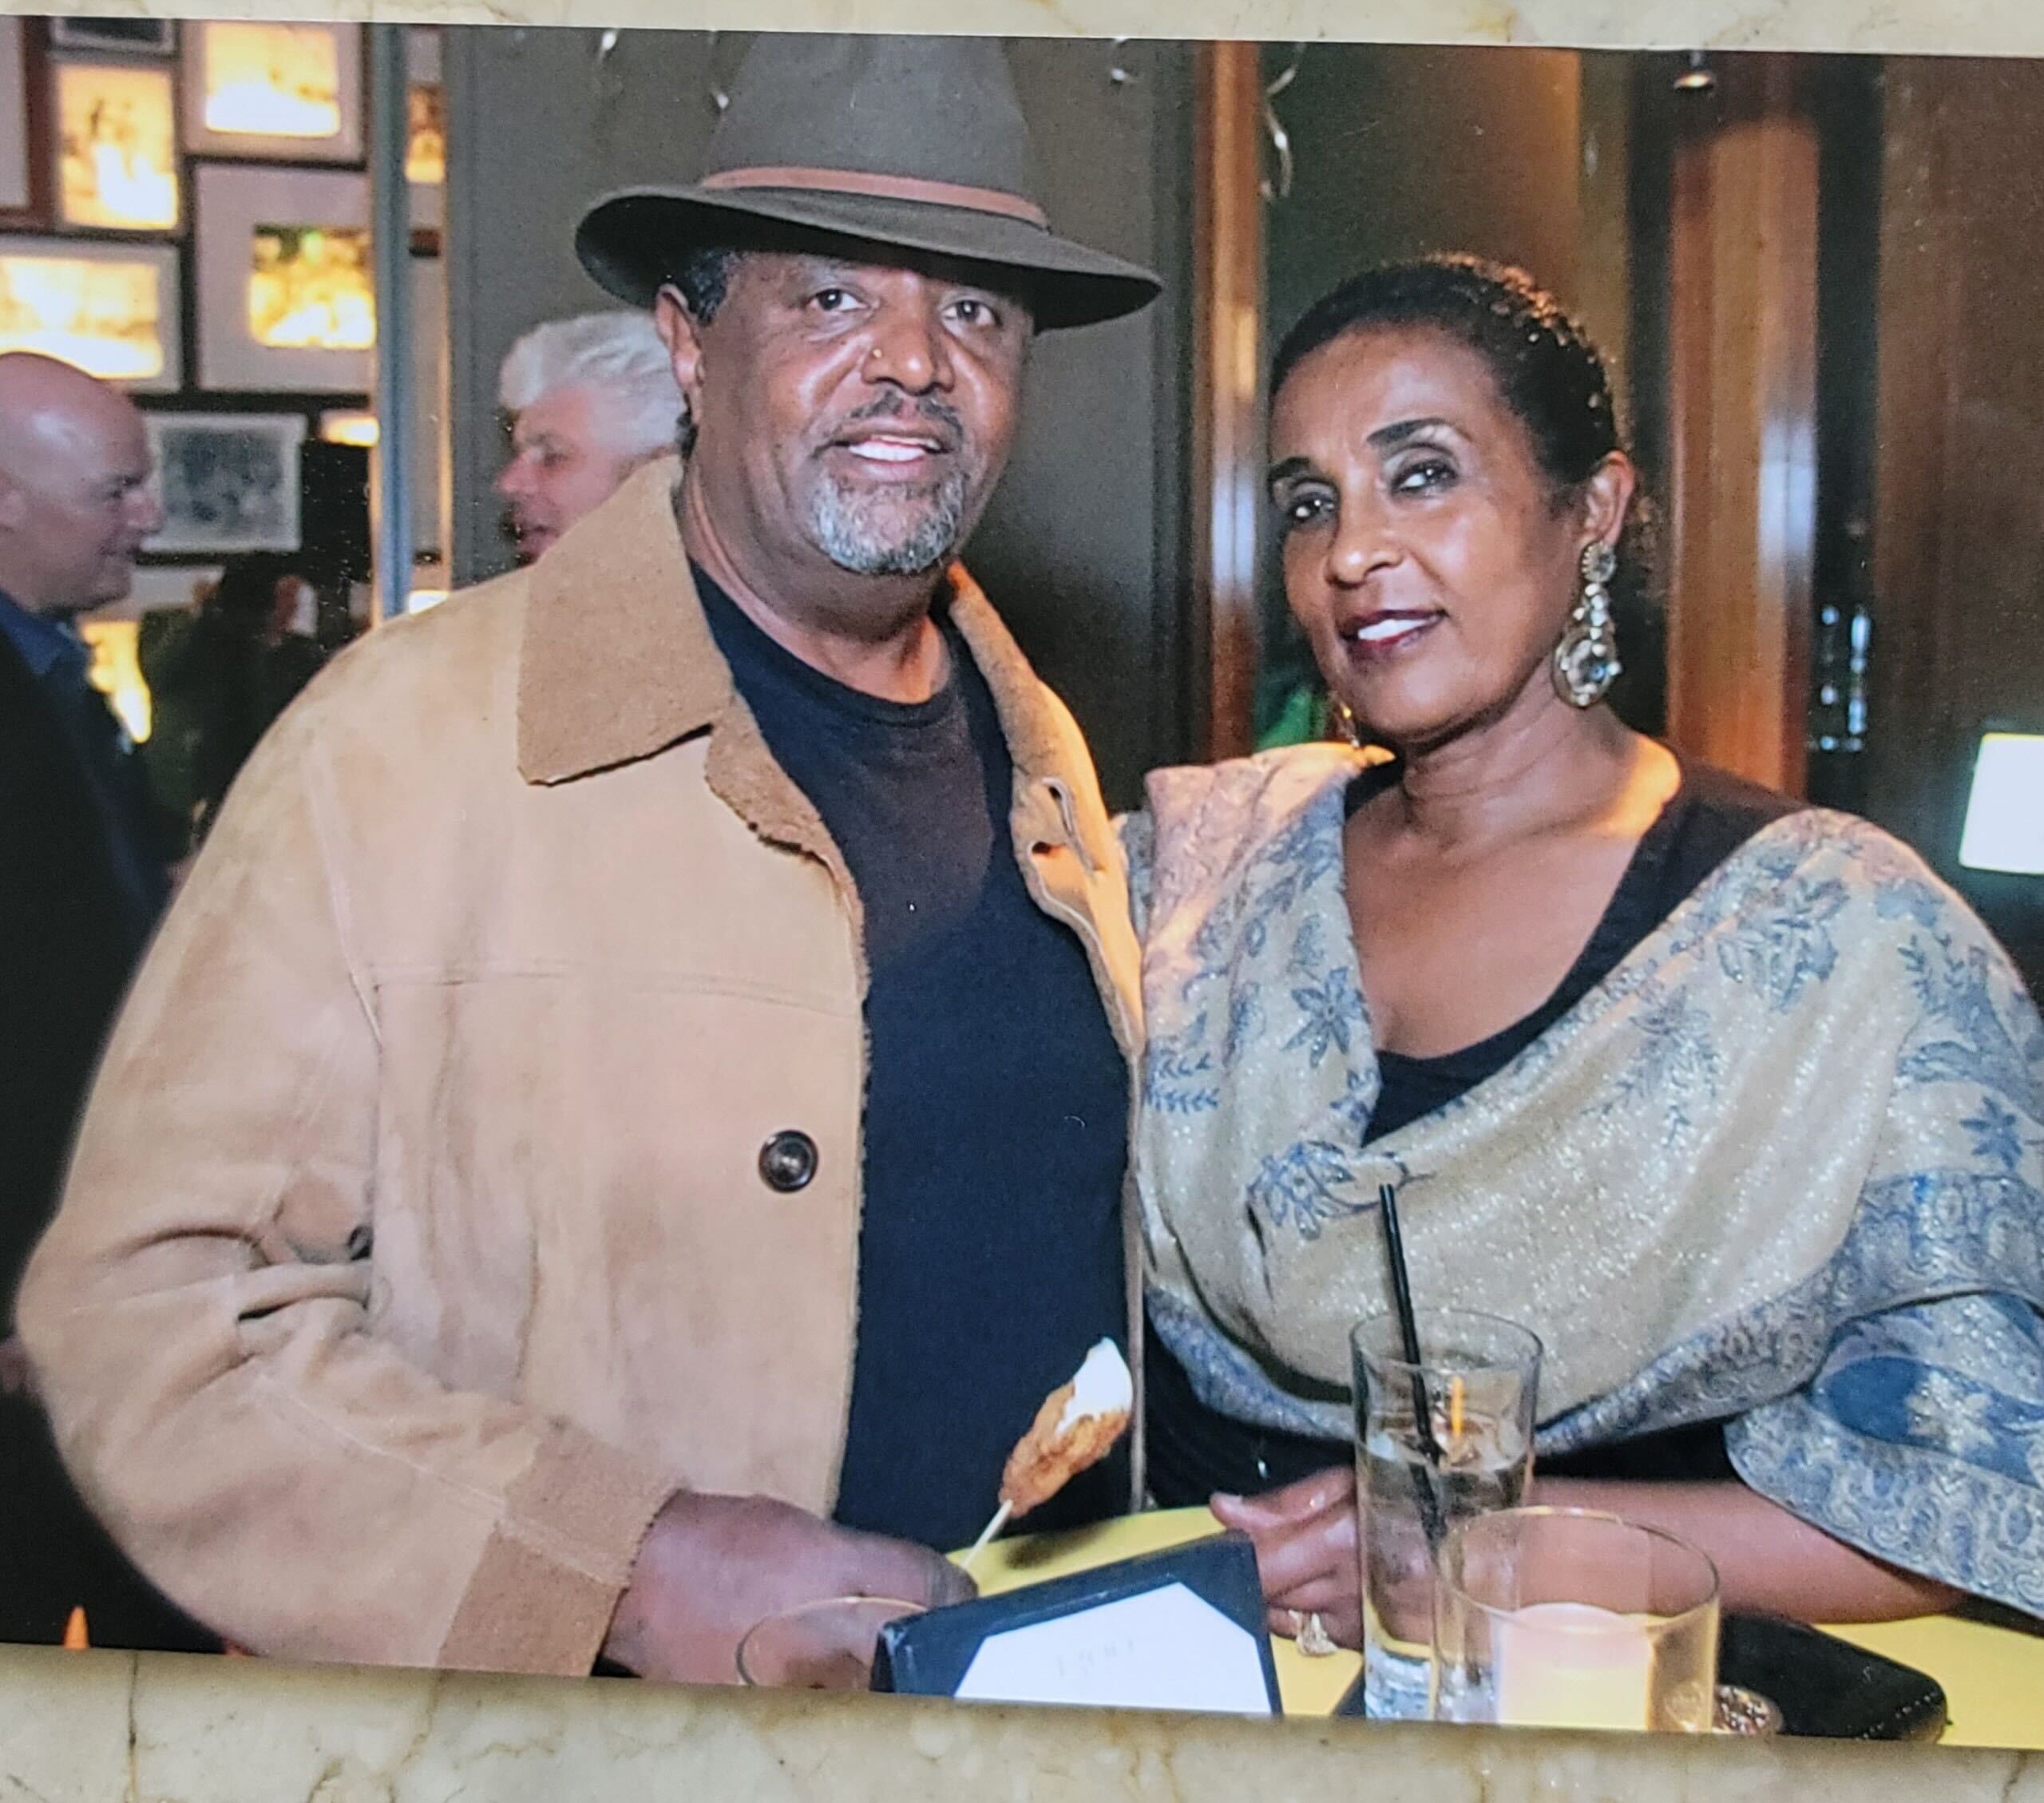 Agonafer Shiferaw poses with his wife Net Alemayehu. The couple both owned and operated their own jazz clubs in the historic Fillmore District.